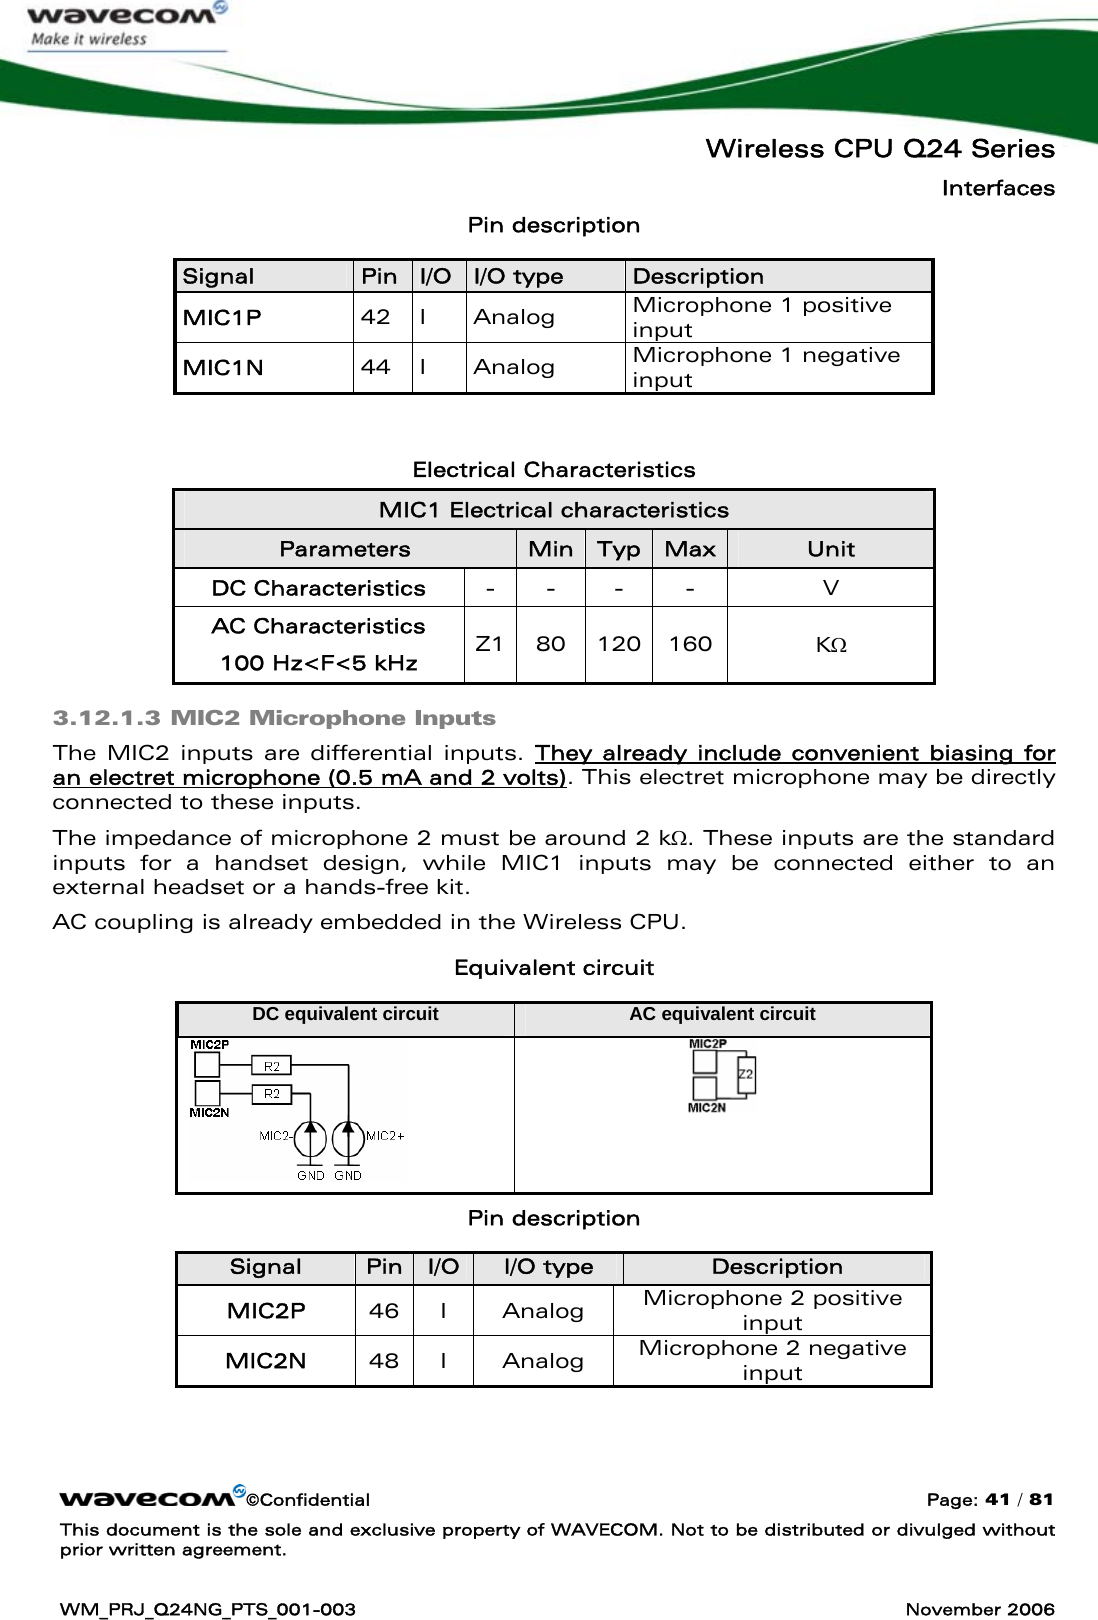   Wireless CPU Q24 Series Interfaces ©Confidential  Page: 41 / 81 This document is the sole and exclusive property of WAVECOM. Not to be distributed or divulged without prior written agreement.  WM_PRJ_Q24NG_PTS_001-003  November 2006  Pin description Signal  Pin  I/O  I/O type  Description MIC1P  42 I  Analog  Microphone 1 positive  input MIC1N  44 I  Analog  Microphone 1 negative input  Electrical Characteristics MIC1 Electrical characteristics Parameters  Min Typ Max Unit DC Characteristics  -  -  -  -  V AC Characteristics 100 Hz&lt;F&lt;5 kHz  Z1 80  120 160  KΩ 3.12.1.3 MIC2 Microphone Inputs The MIC2 inputs are differential inputs. They already include convenient biasing for an electret microphone (0.5 mA and 2 volts). This electret microphone may be directly connected to these inputs. The impedance of microphone 2 must be around 2 kΩ. These inputs are the standard inputs for a handset design, while MIC1 inputs may be connected either to an external headset or a hands-free kit. AC coupling is already embedded in the Wireless CPU. Equivalent circuit DC equivalent circuit  AC equivalent circuit   Pin description Signal  Pin  I/O  I/O type  Description MIC2P  46 I  Analog  Microphone 2 positive  input MIC2N  48 I  Analog  Microphone 2 negative input  